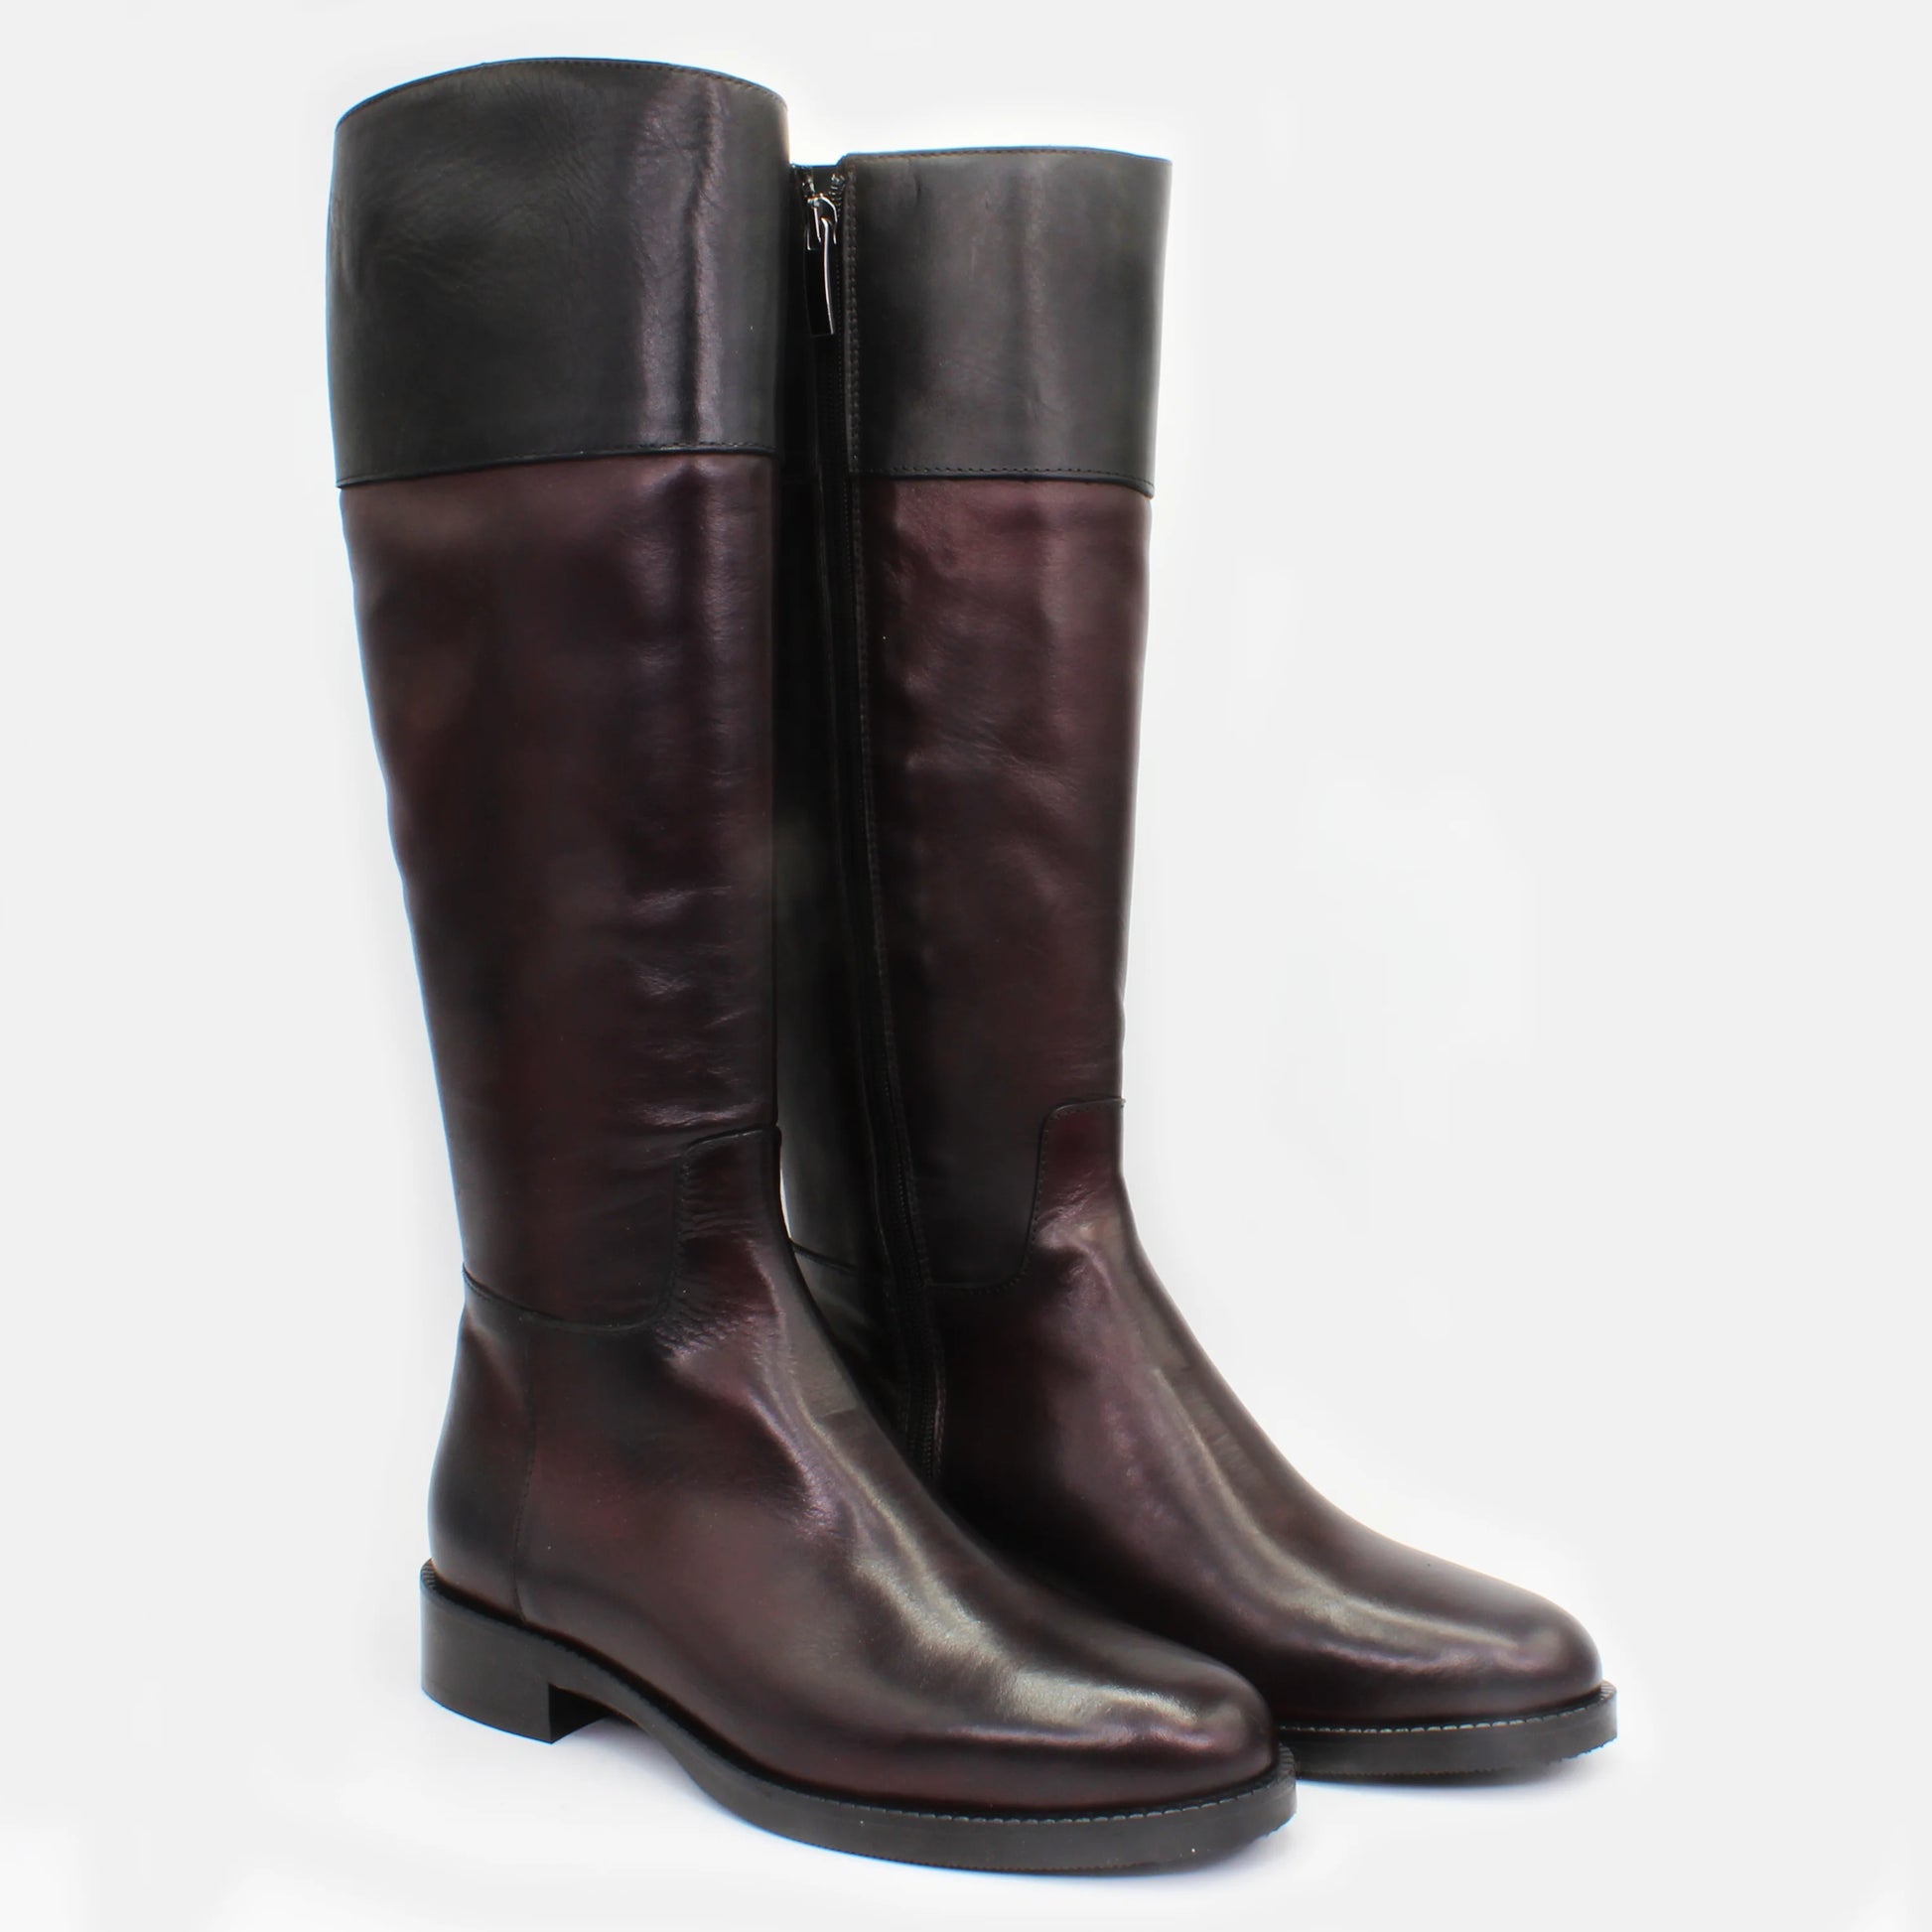 Shop Handmade Italian Leather Equestrian Boot in Burgundy and Nero (GC2060) or browse our range of hand-made Italian boots for women in leather or suede in-store at Aliverti Cape Town, or shop online. We deliver in South Africa & offer multiple payment plans as well as accept multiple safe & secure payment methods.